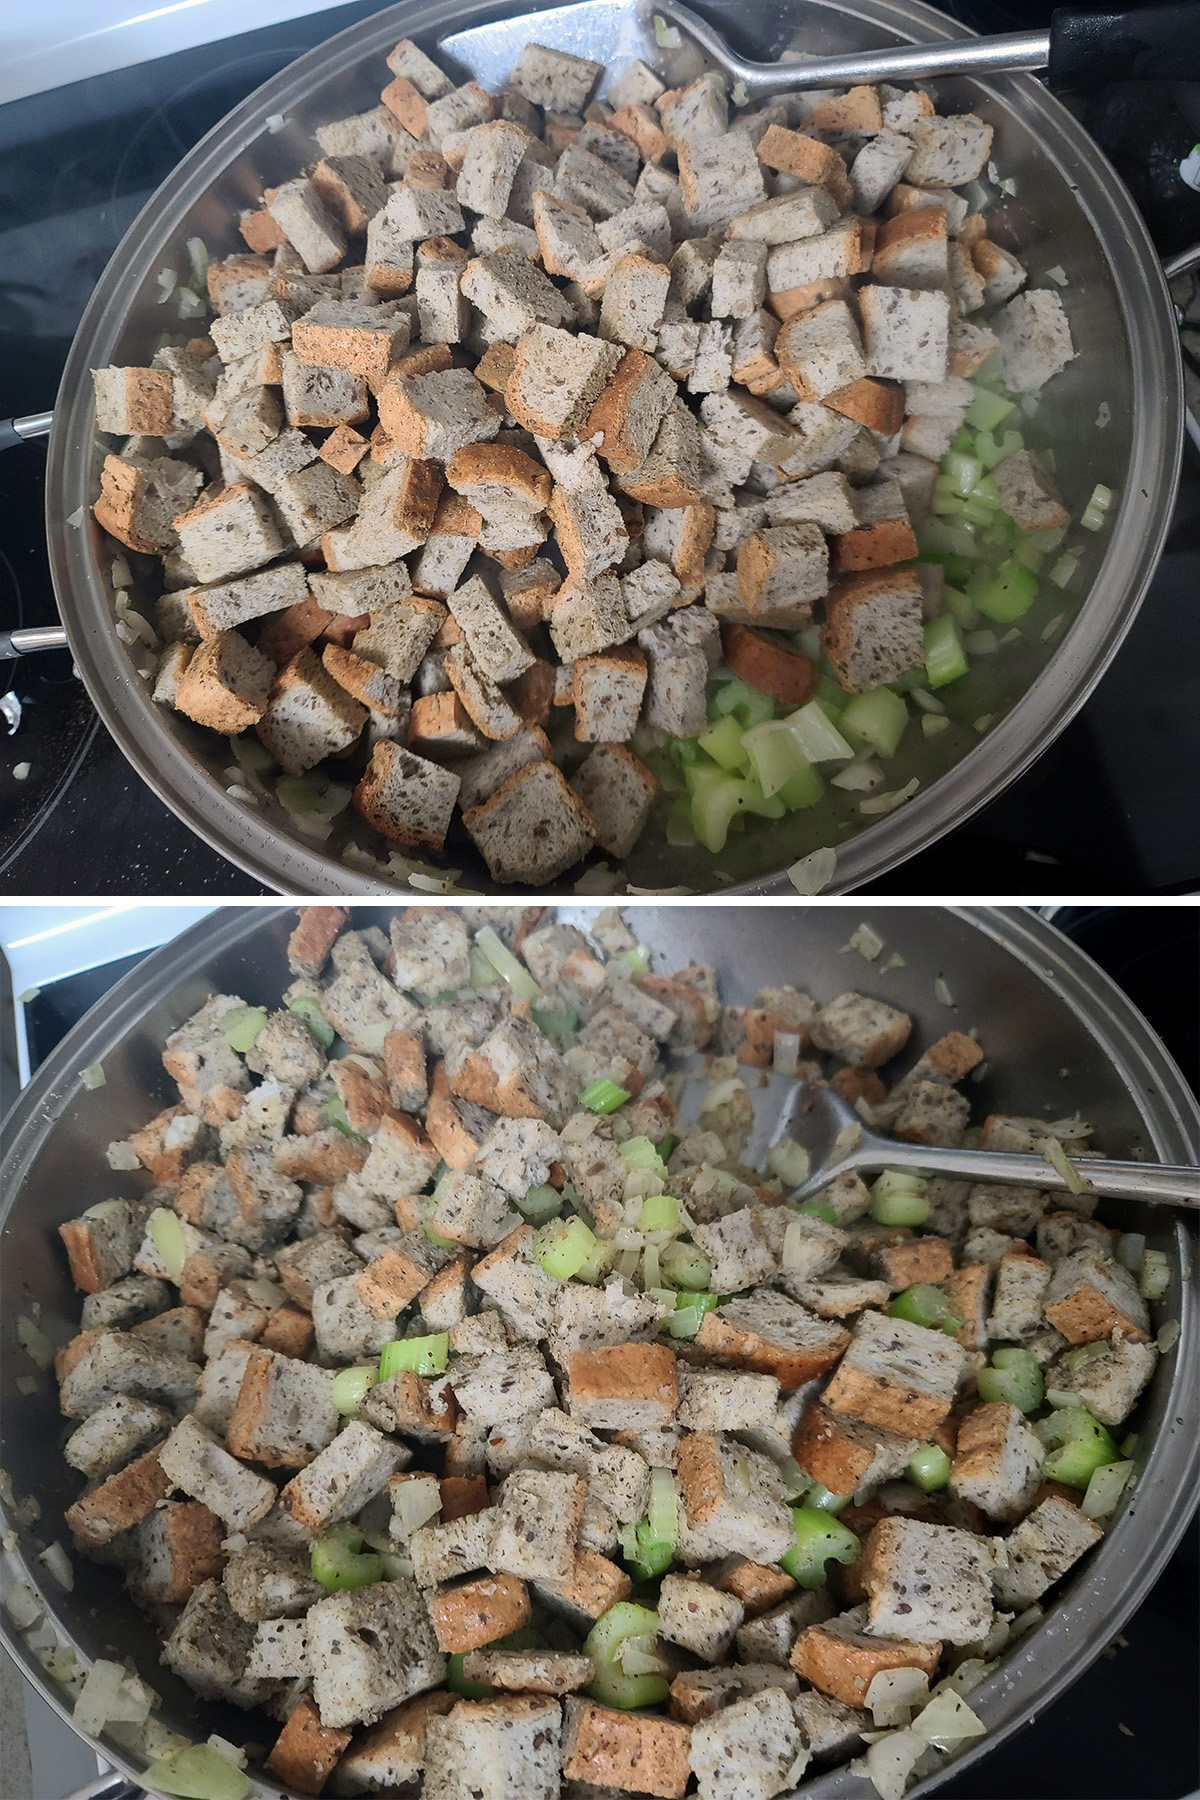 A 2 part image showing seasoned bread cubes being added to the vegetable and butter mixture.